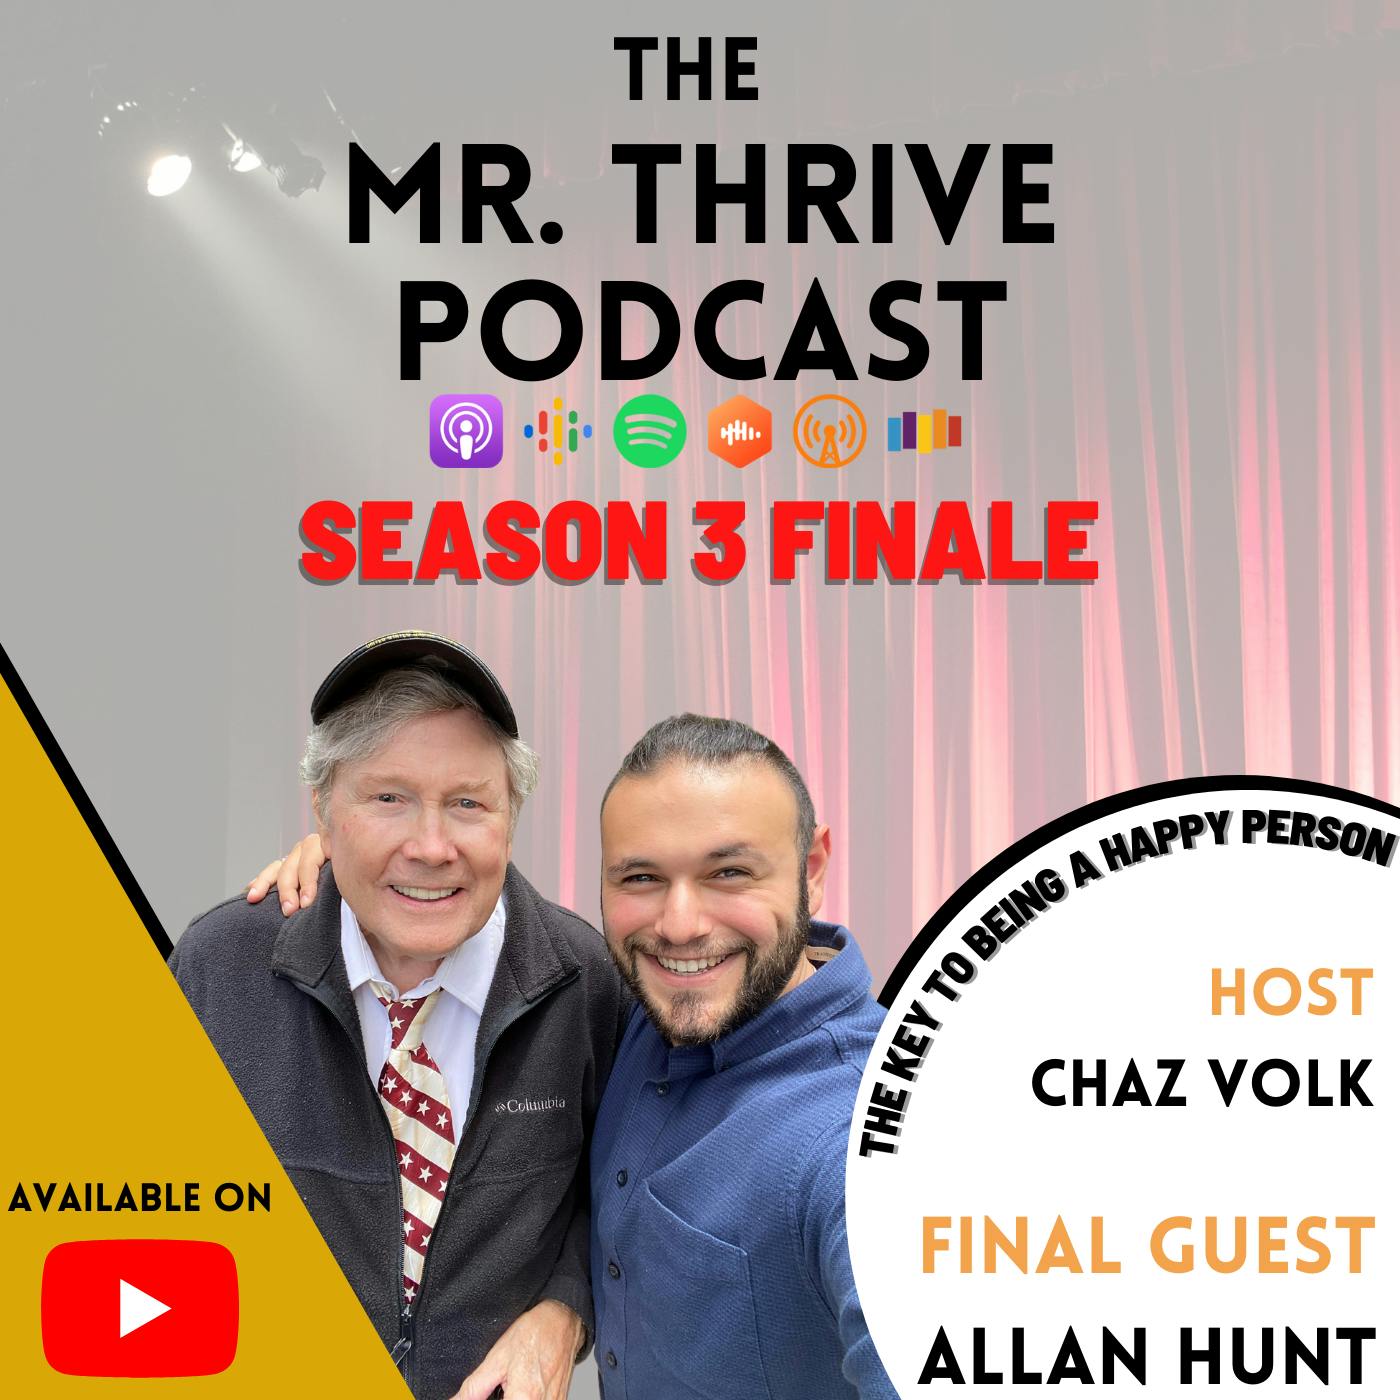 Season 3 Finale - The Key to Being a Happy Person | Allan Hunt, Actor and Director